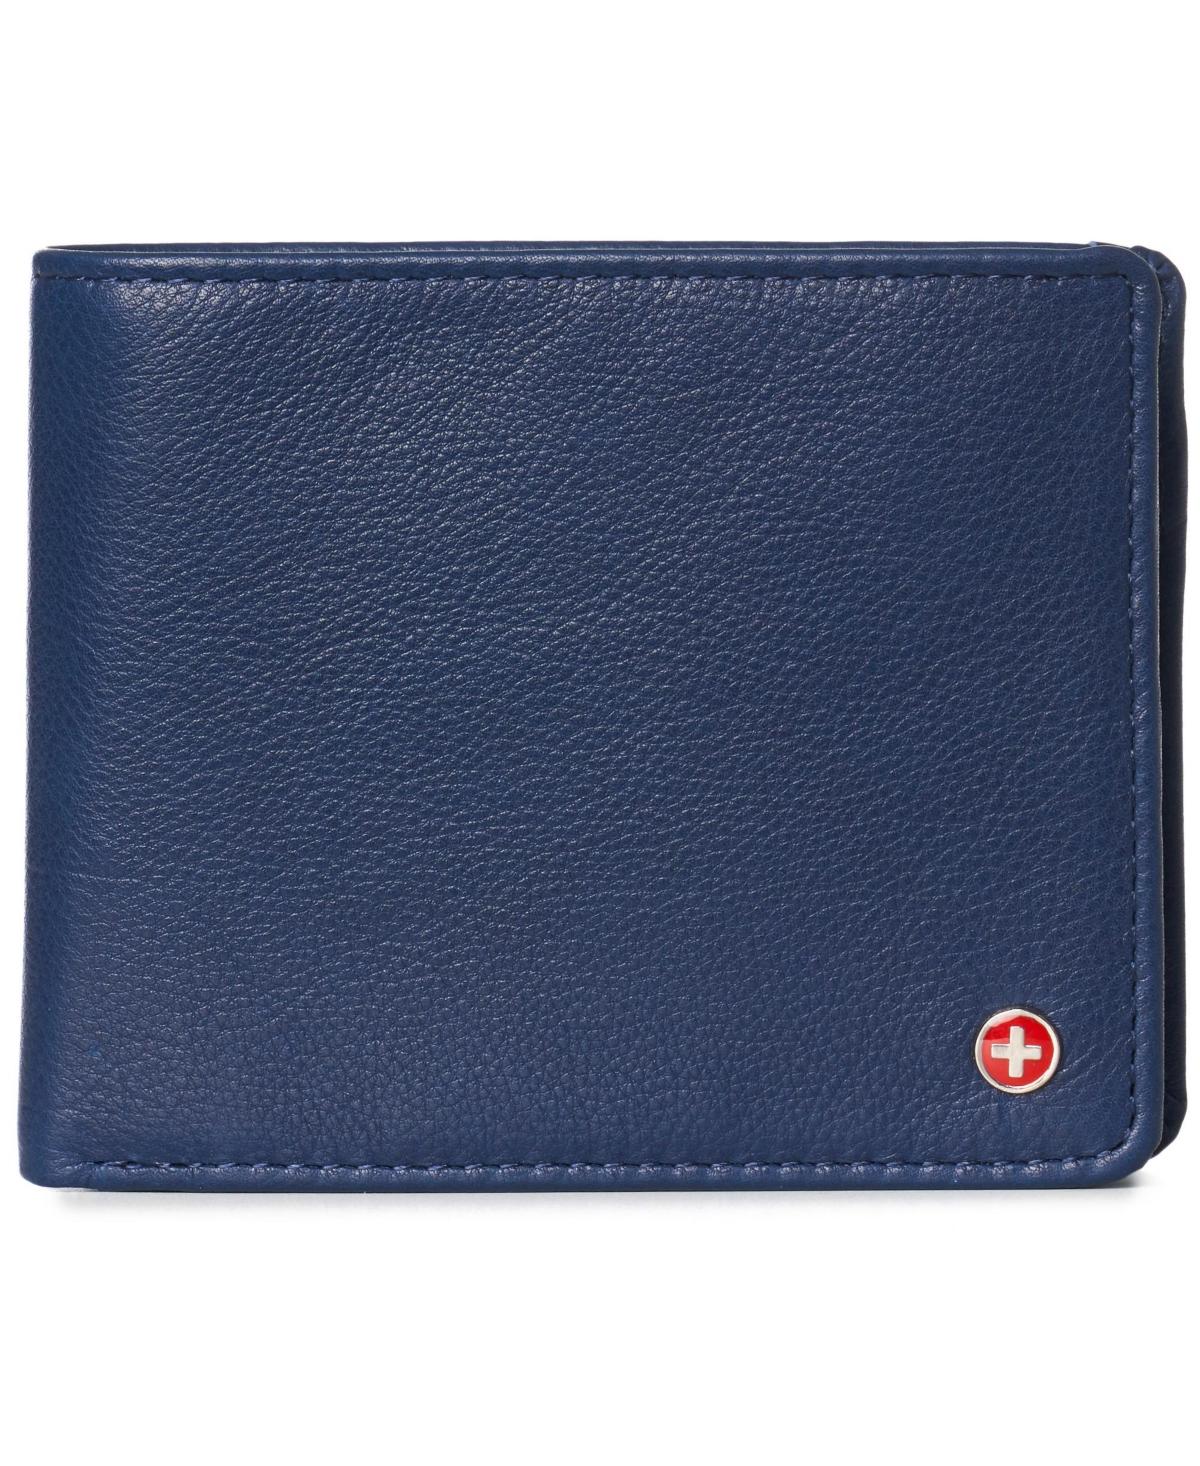 Alpine Swiss Rfid Safe Leather Wallet Deluxe Capacity Coin Pocket Bifold in  Blue for Men | Lyst